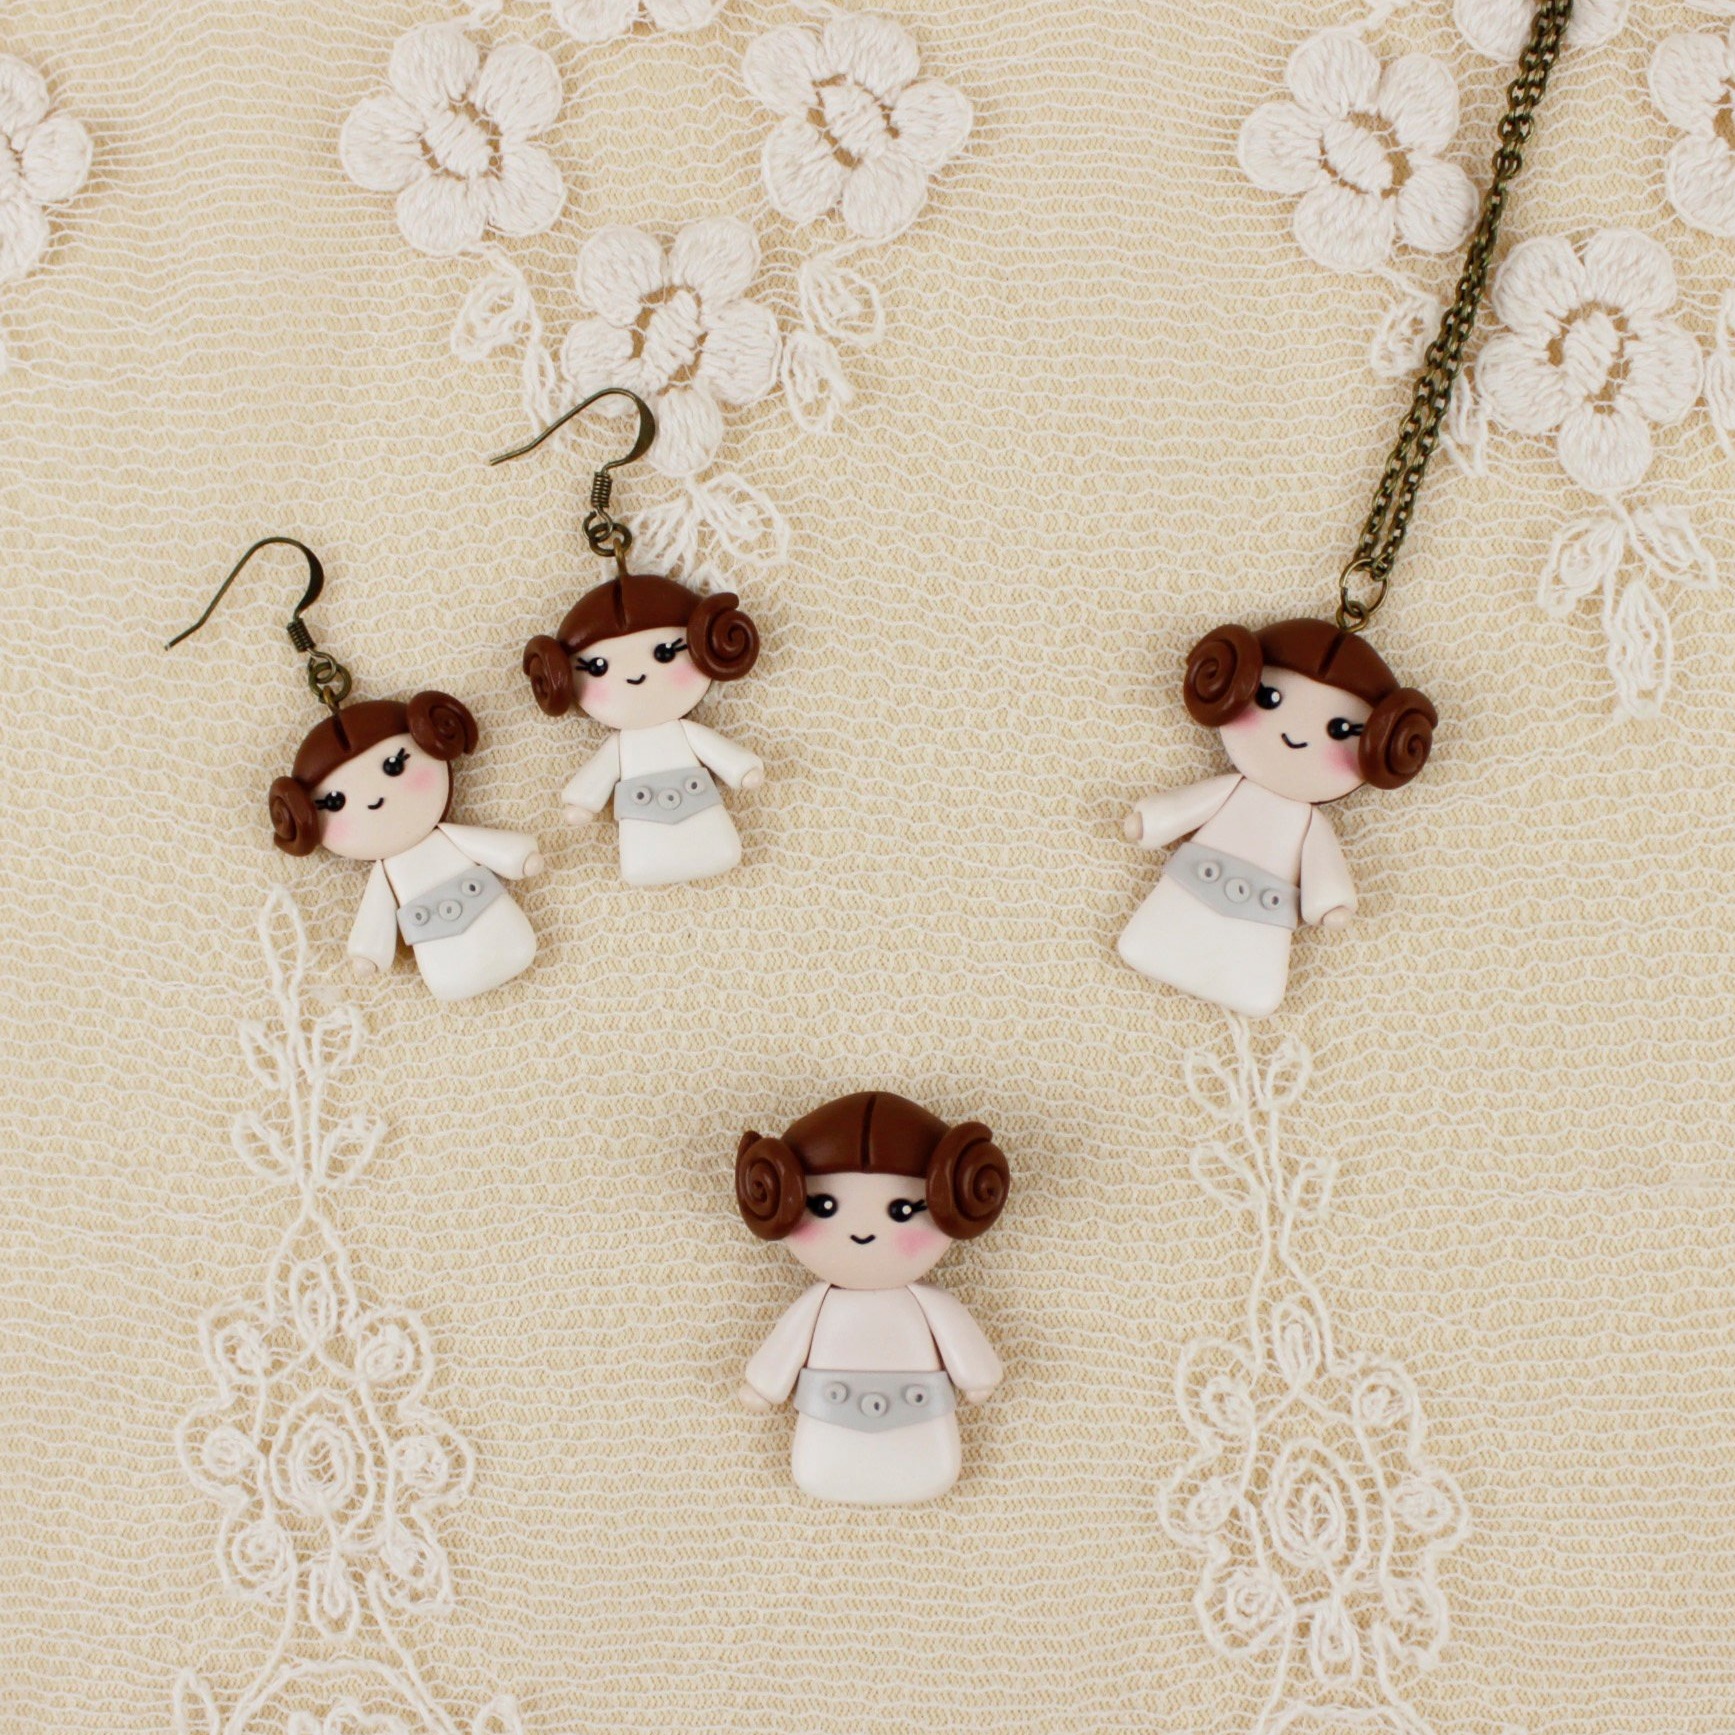 Star Wars Princess Leia Earrings and Necklace by MagicStuffStore on Etsy